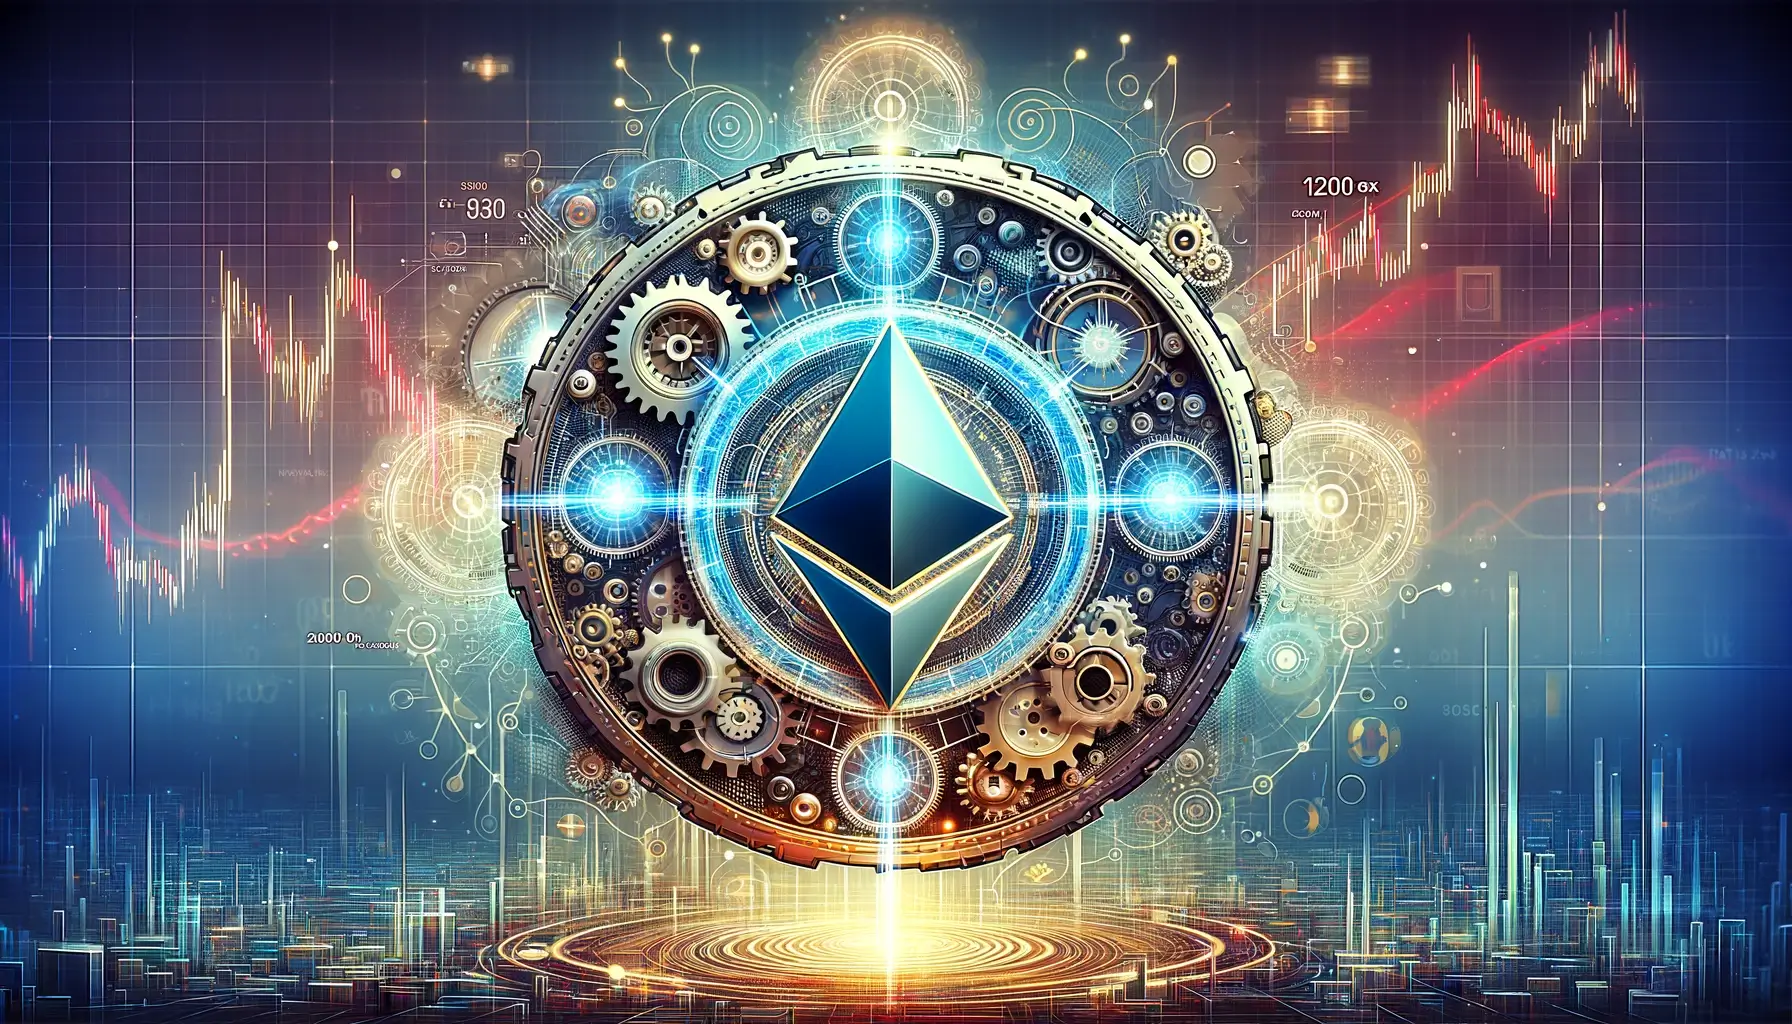 A digital illustration of the Ethereum logo integrated with elements representing upgrade and innovation, such as gears or digital networks.